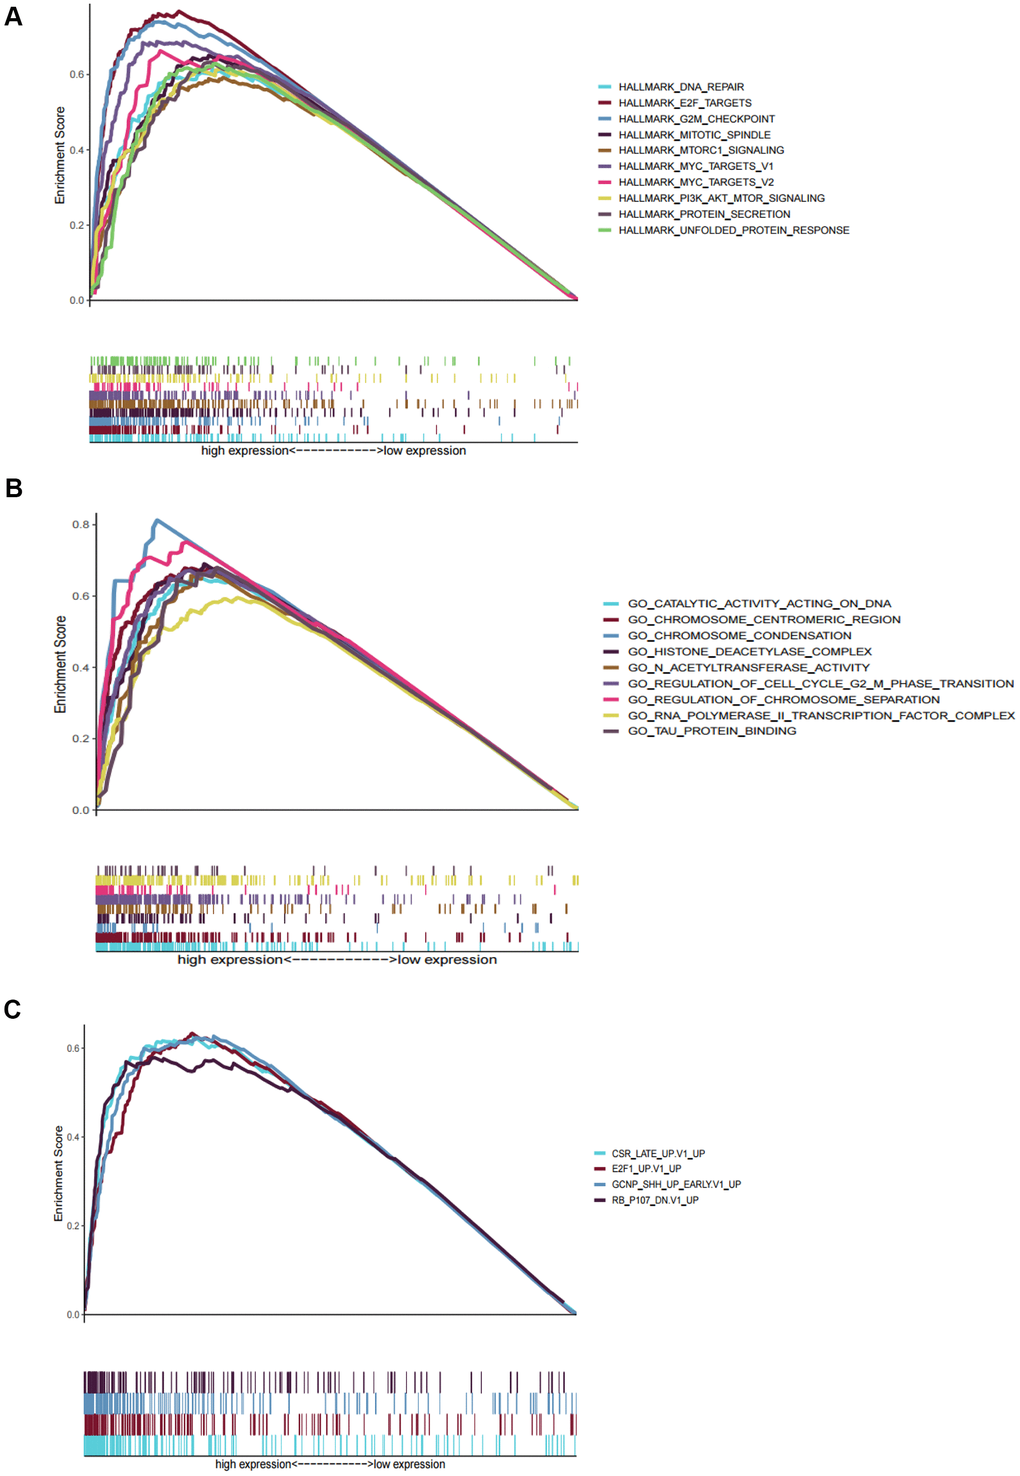 Gene set enrichment analyses between high and low risk group in TCGA. (A) The top ten significantly enriched cancer hallmarks in high-risk group. (B) The significantly enriched GO terms in high-risk group. (C) The significantly enriched oncological signatures in high-risk group.